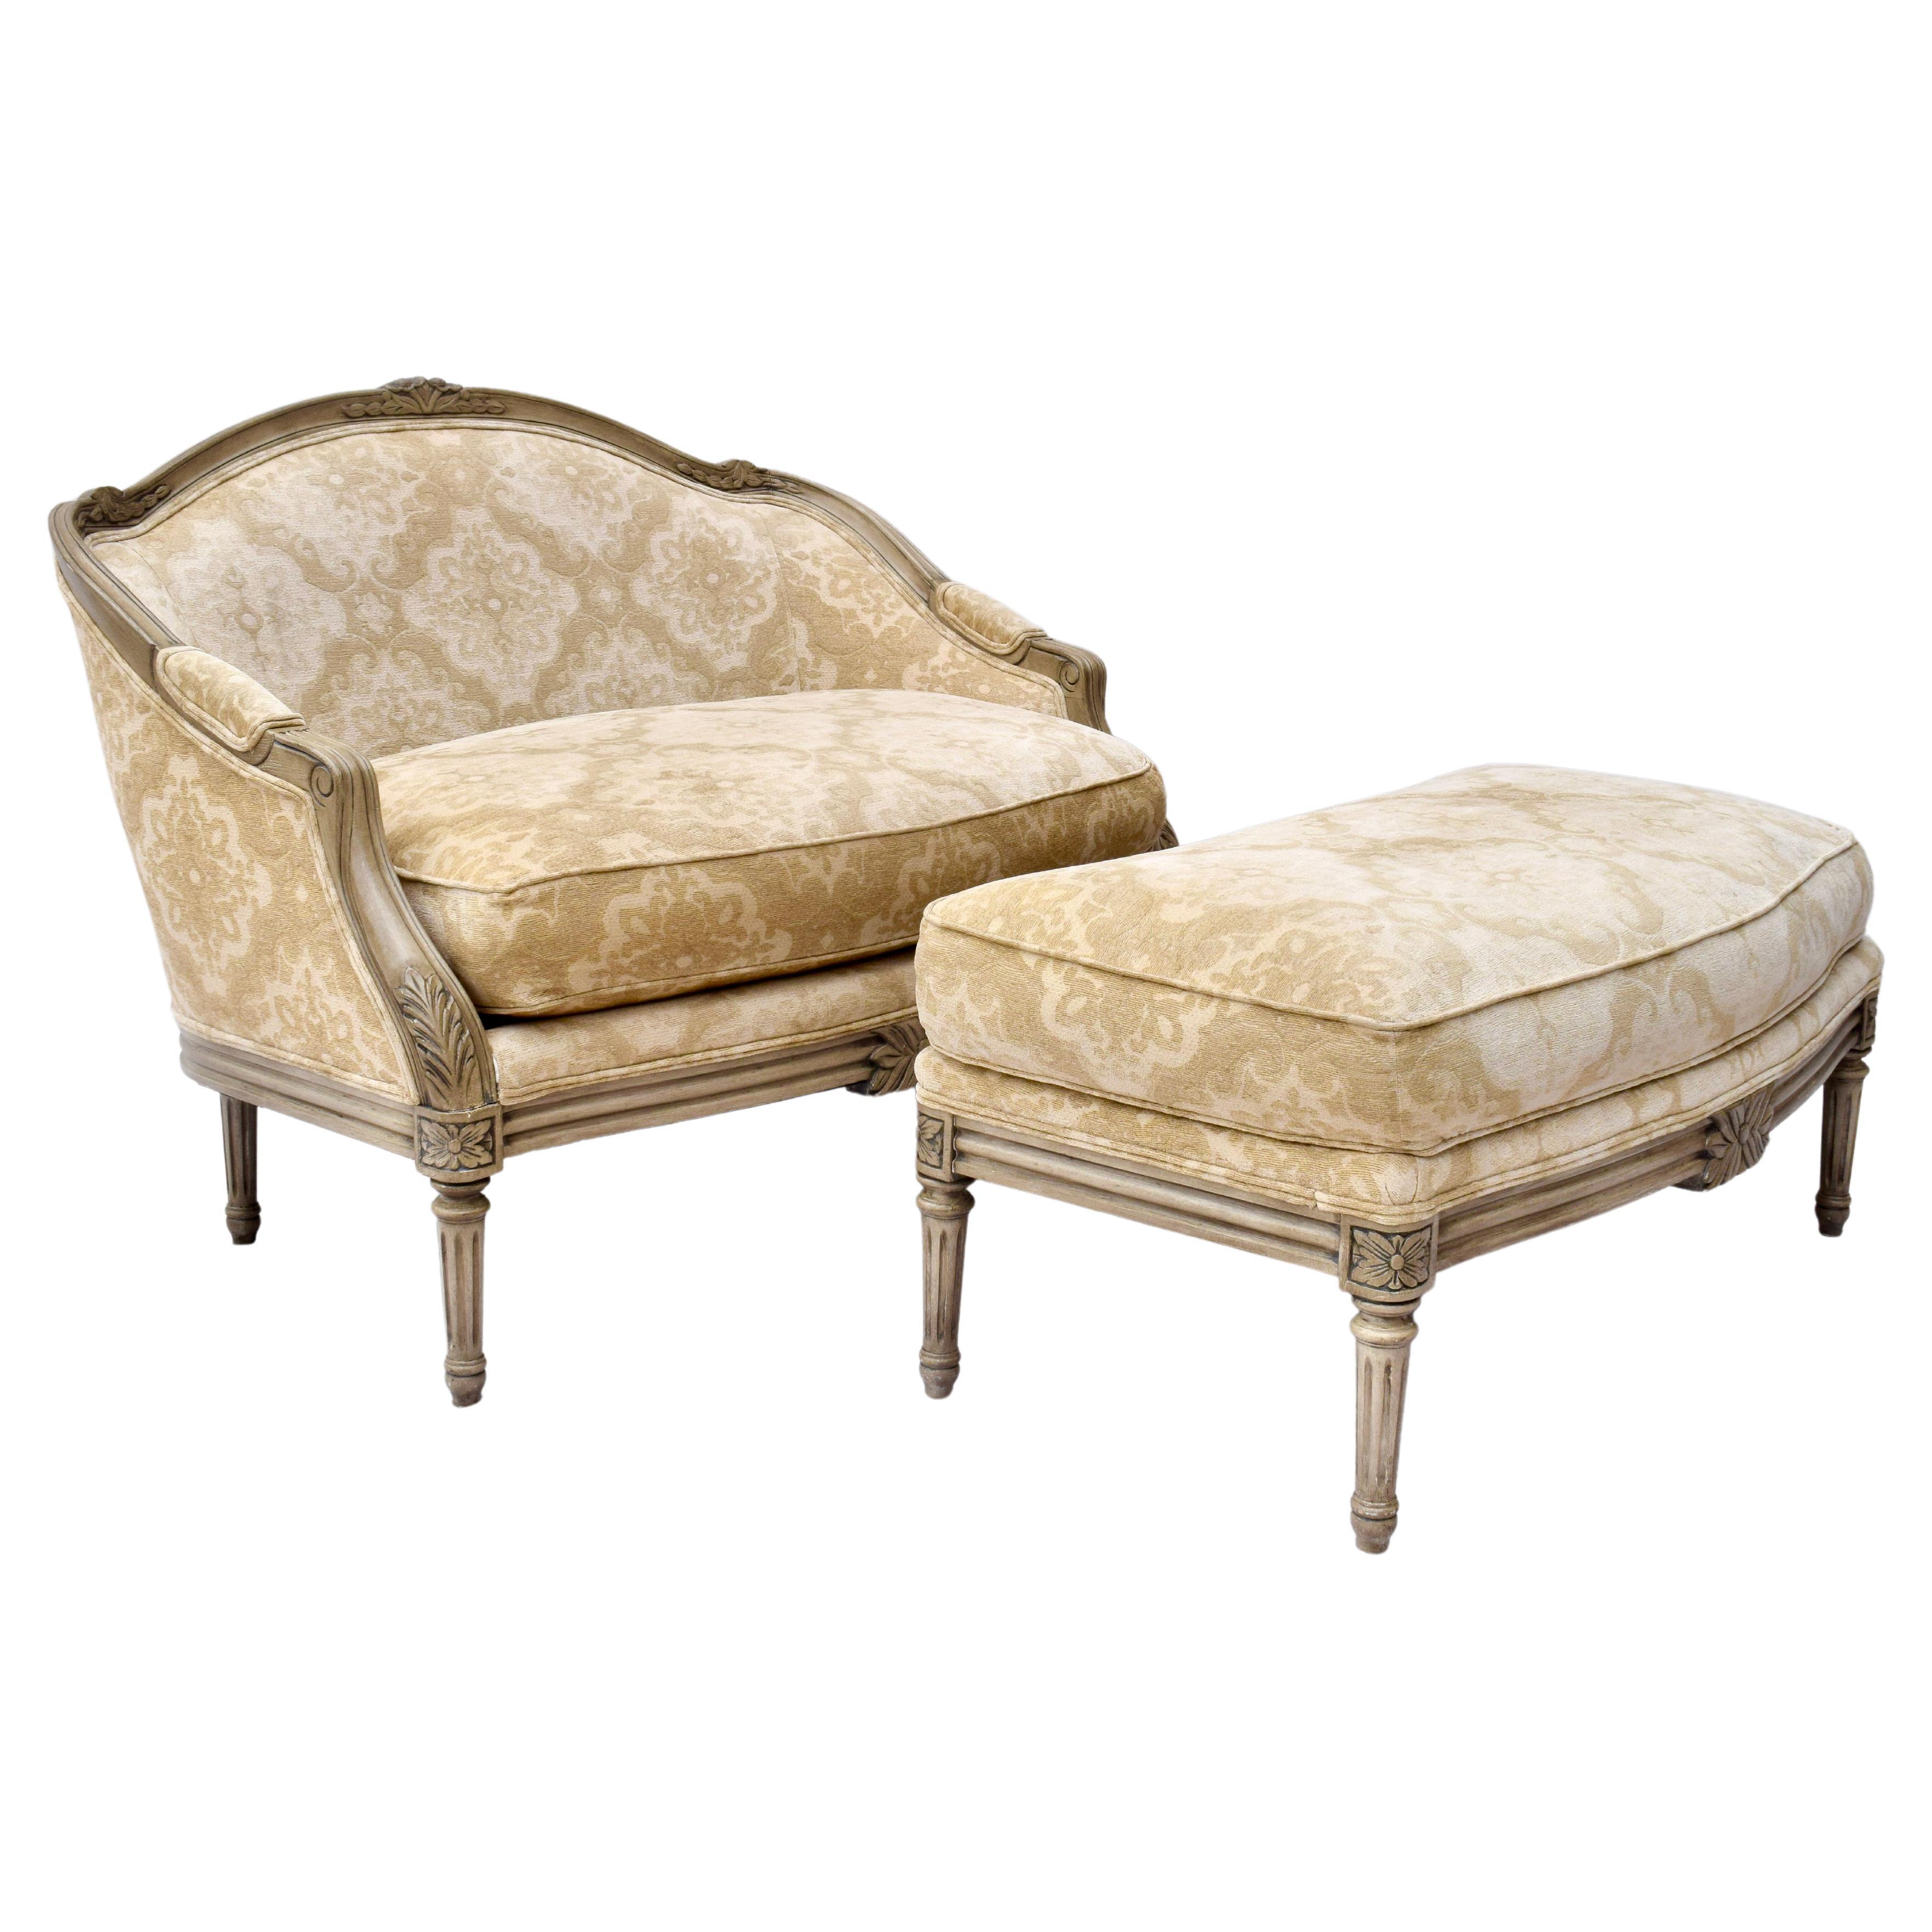 Harden Furniture Bergere Chairs